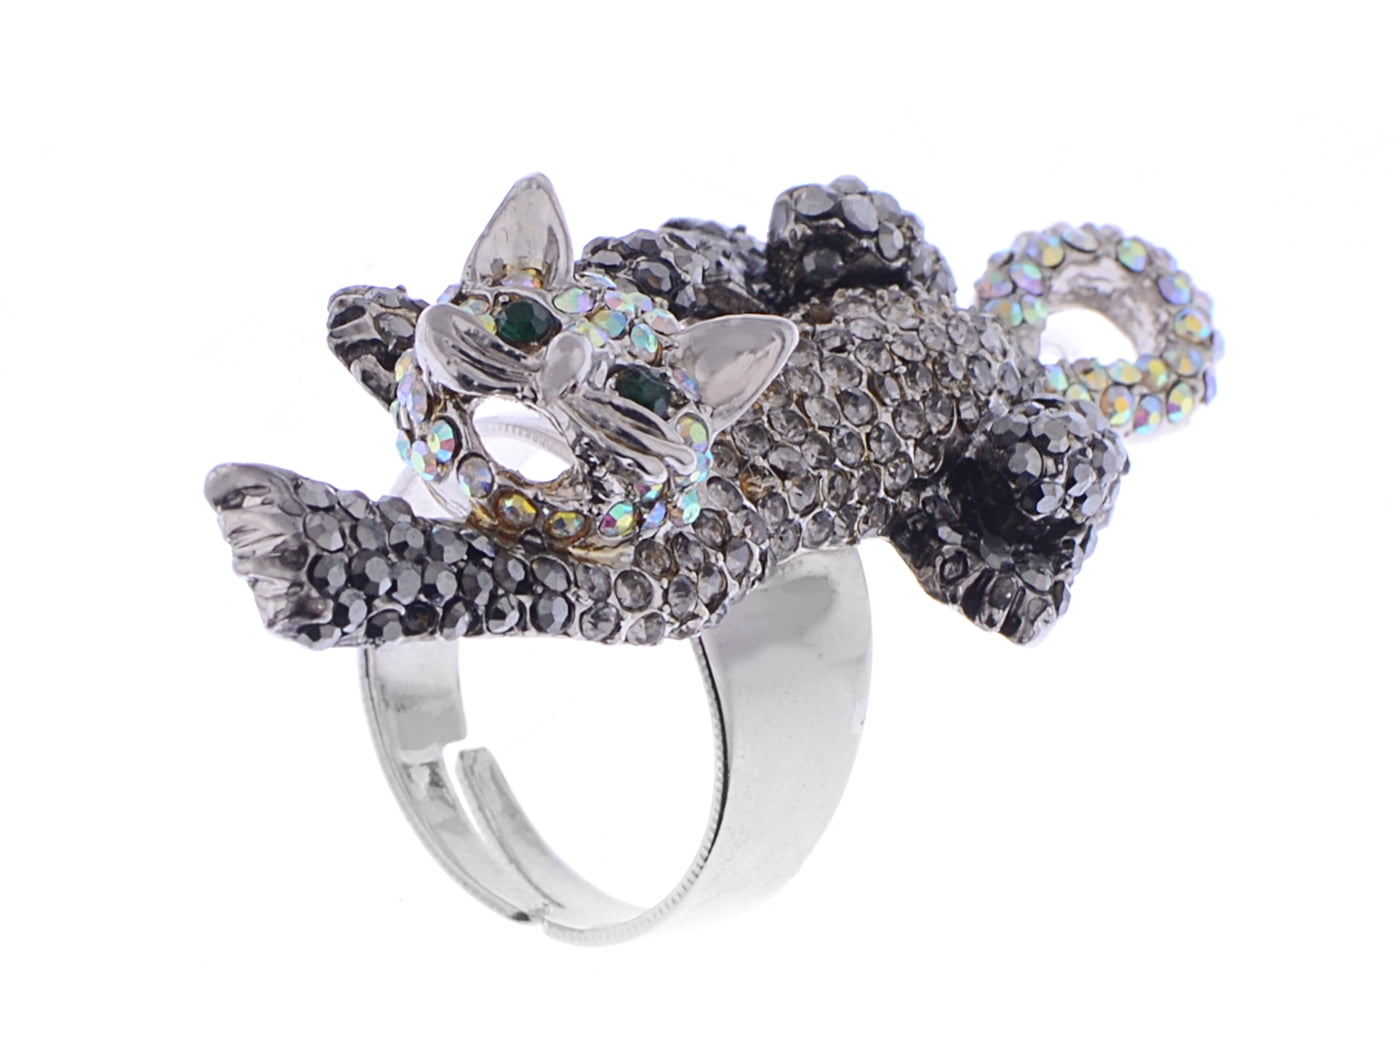 Curled Cat Gift For Her Adjustable Cat Ring Animal Lovers Silver Cat Ring Animal Jewelry Cat Lover